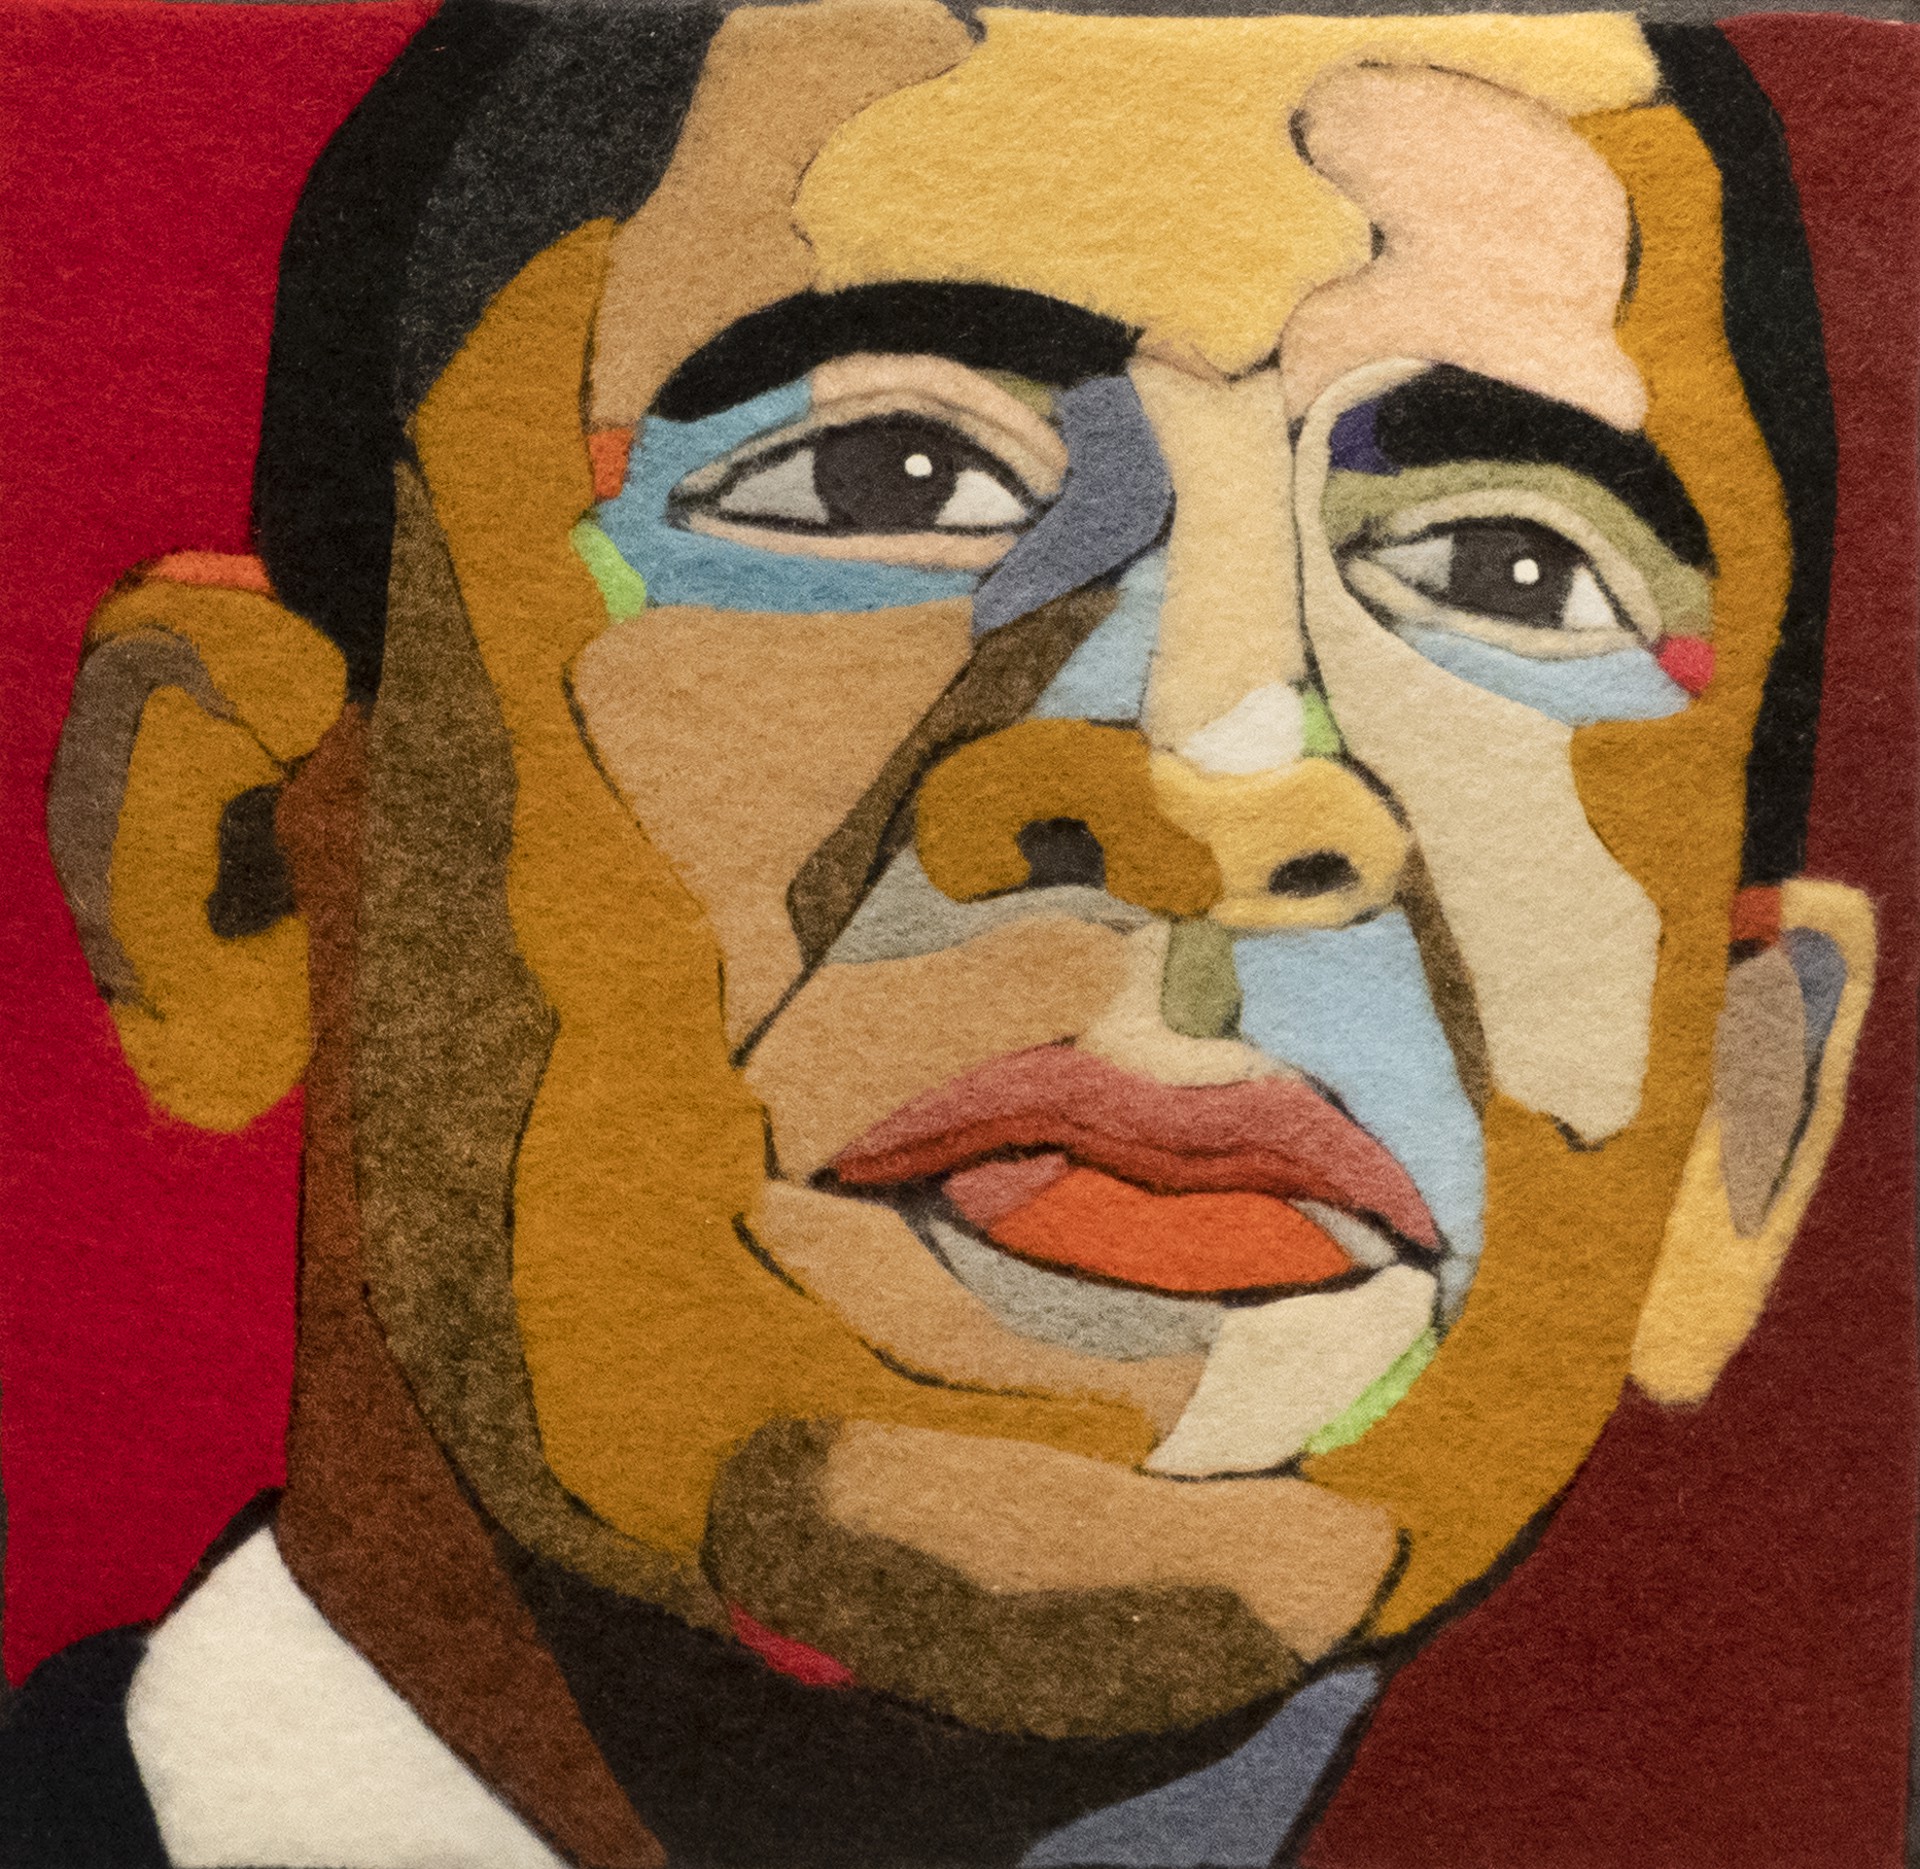 Obama by Jeff Hand